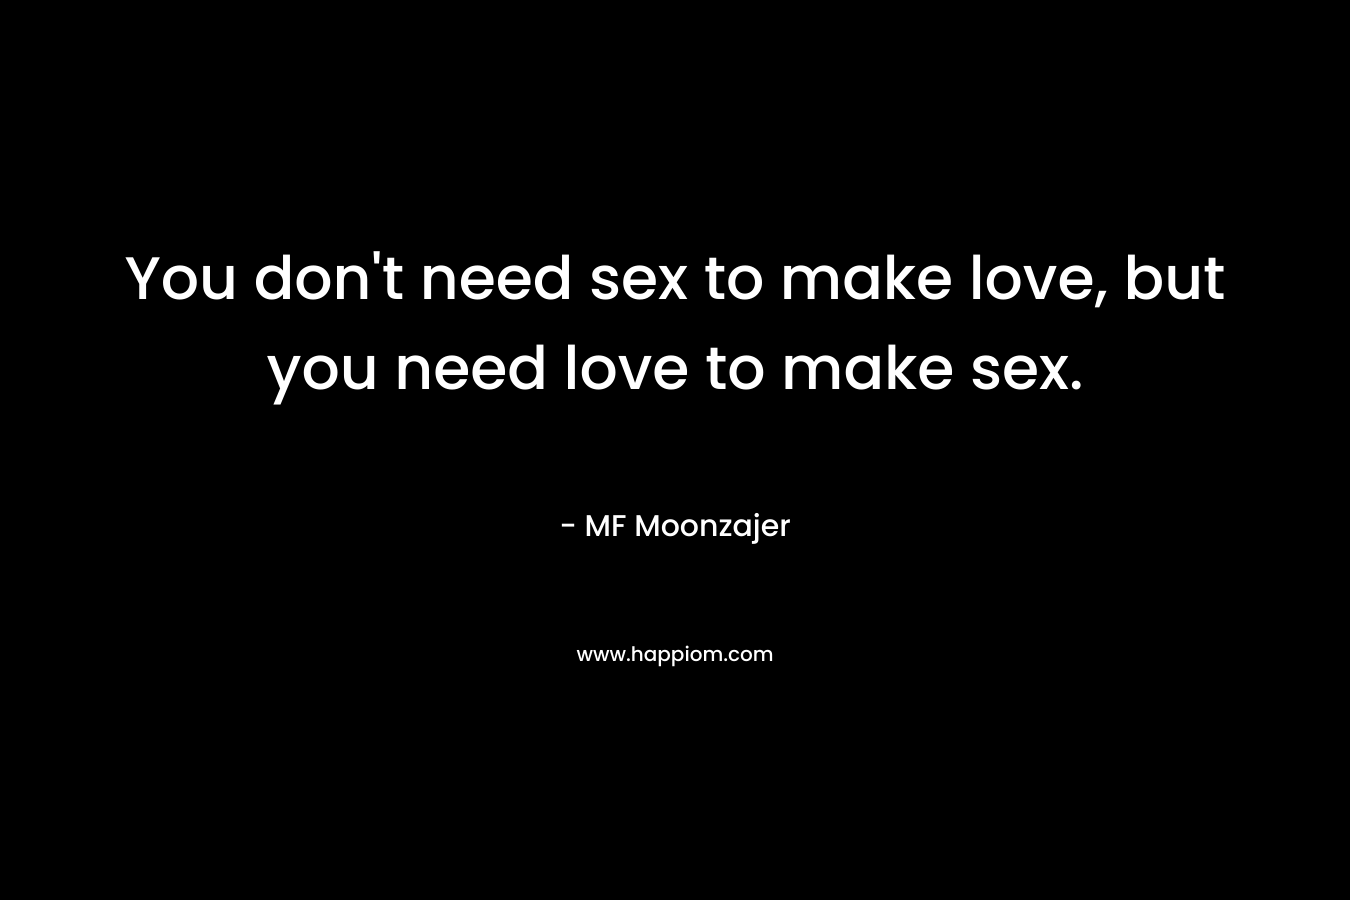 You don't need sex to make love, but you need love to make sex.